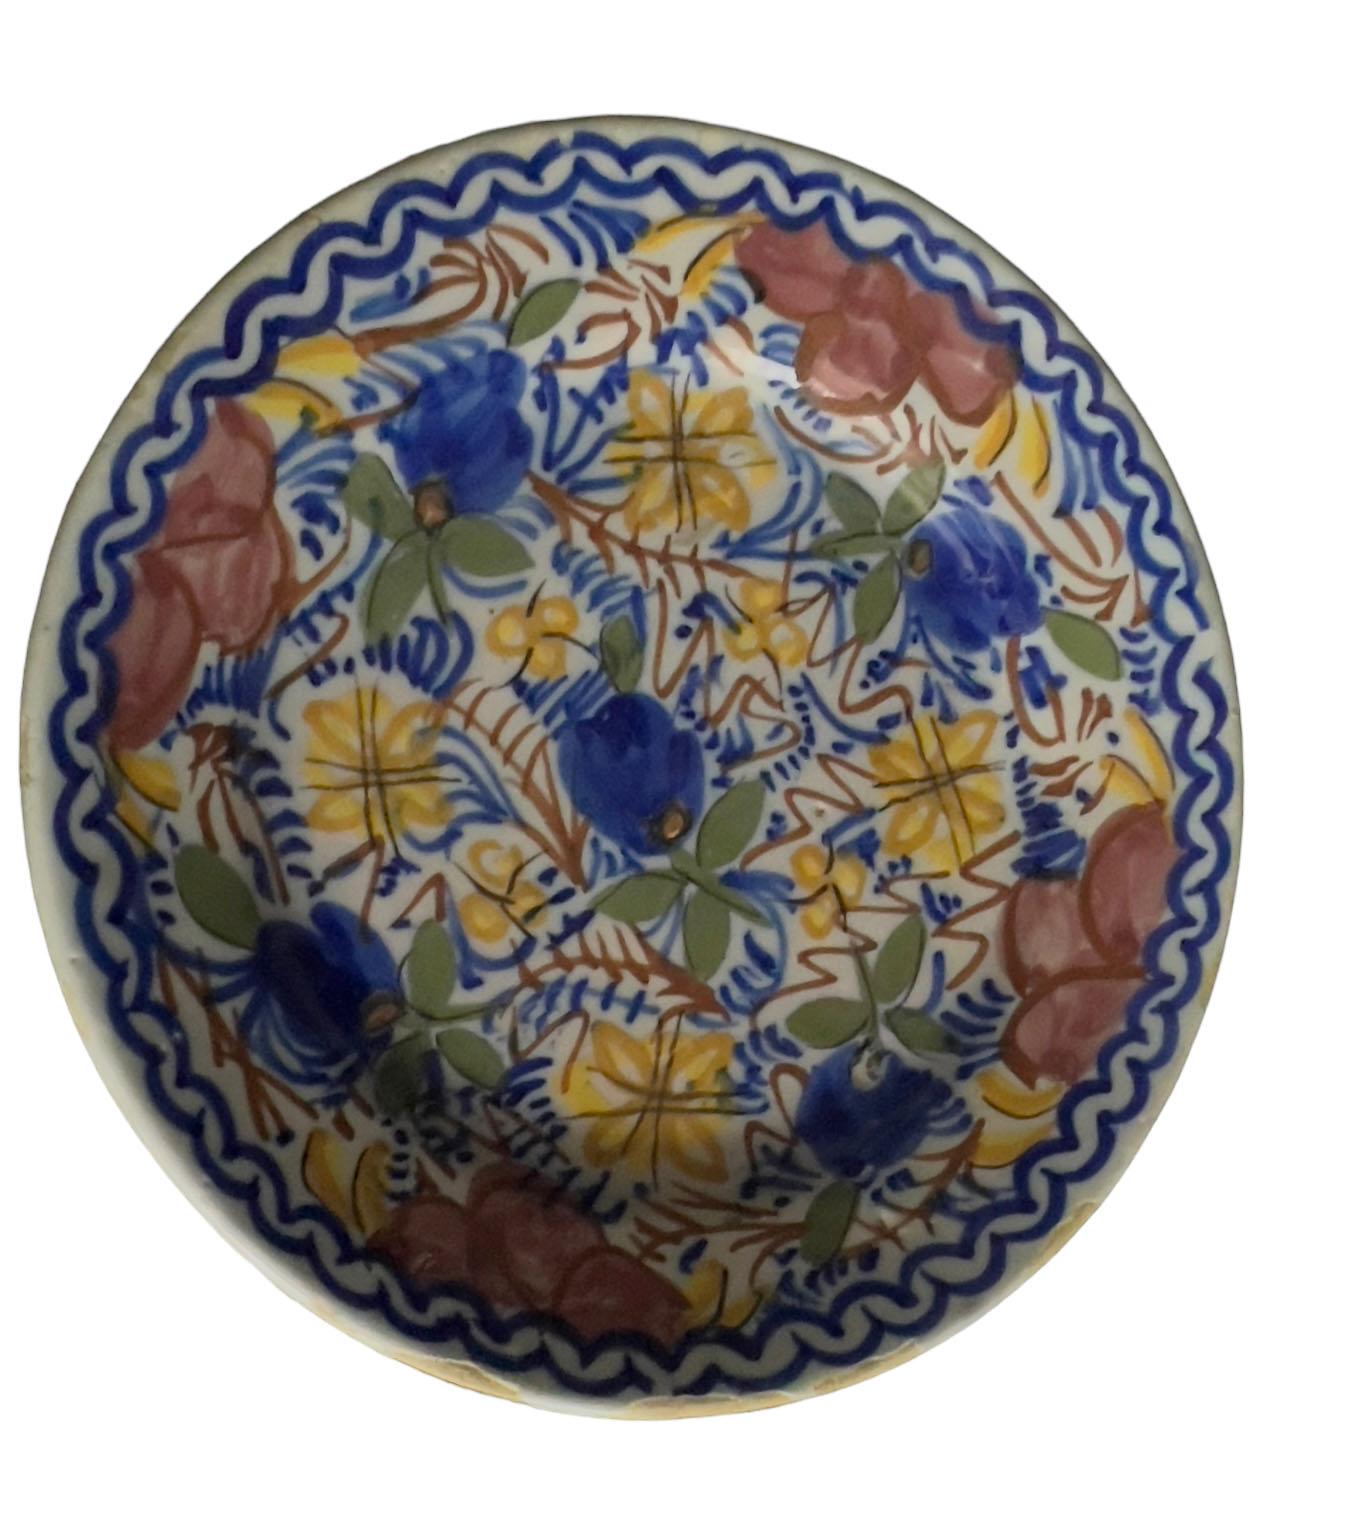 A vintage Spanish floral ceramic plate with blue, yellow red and green flowers. Circa 1960s.